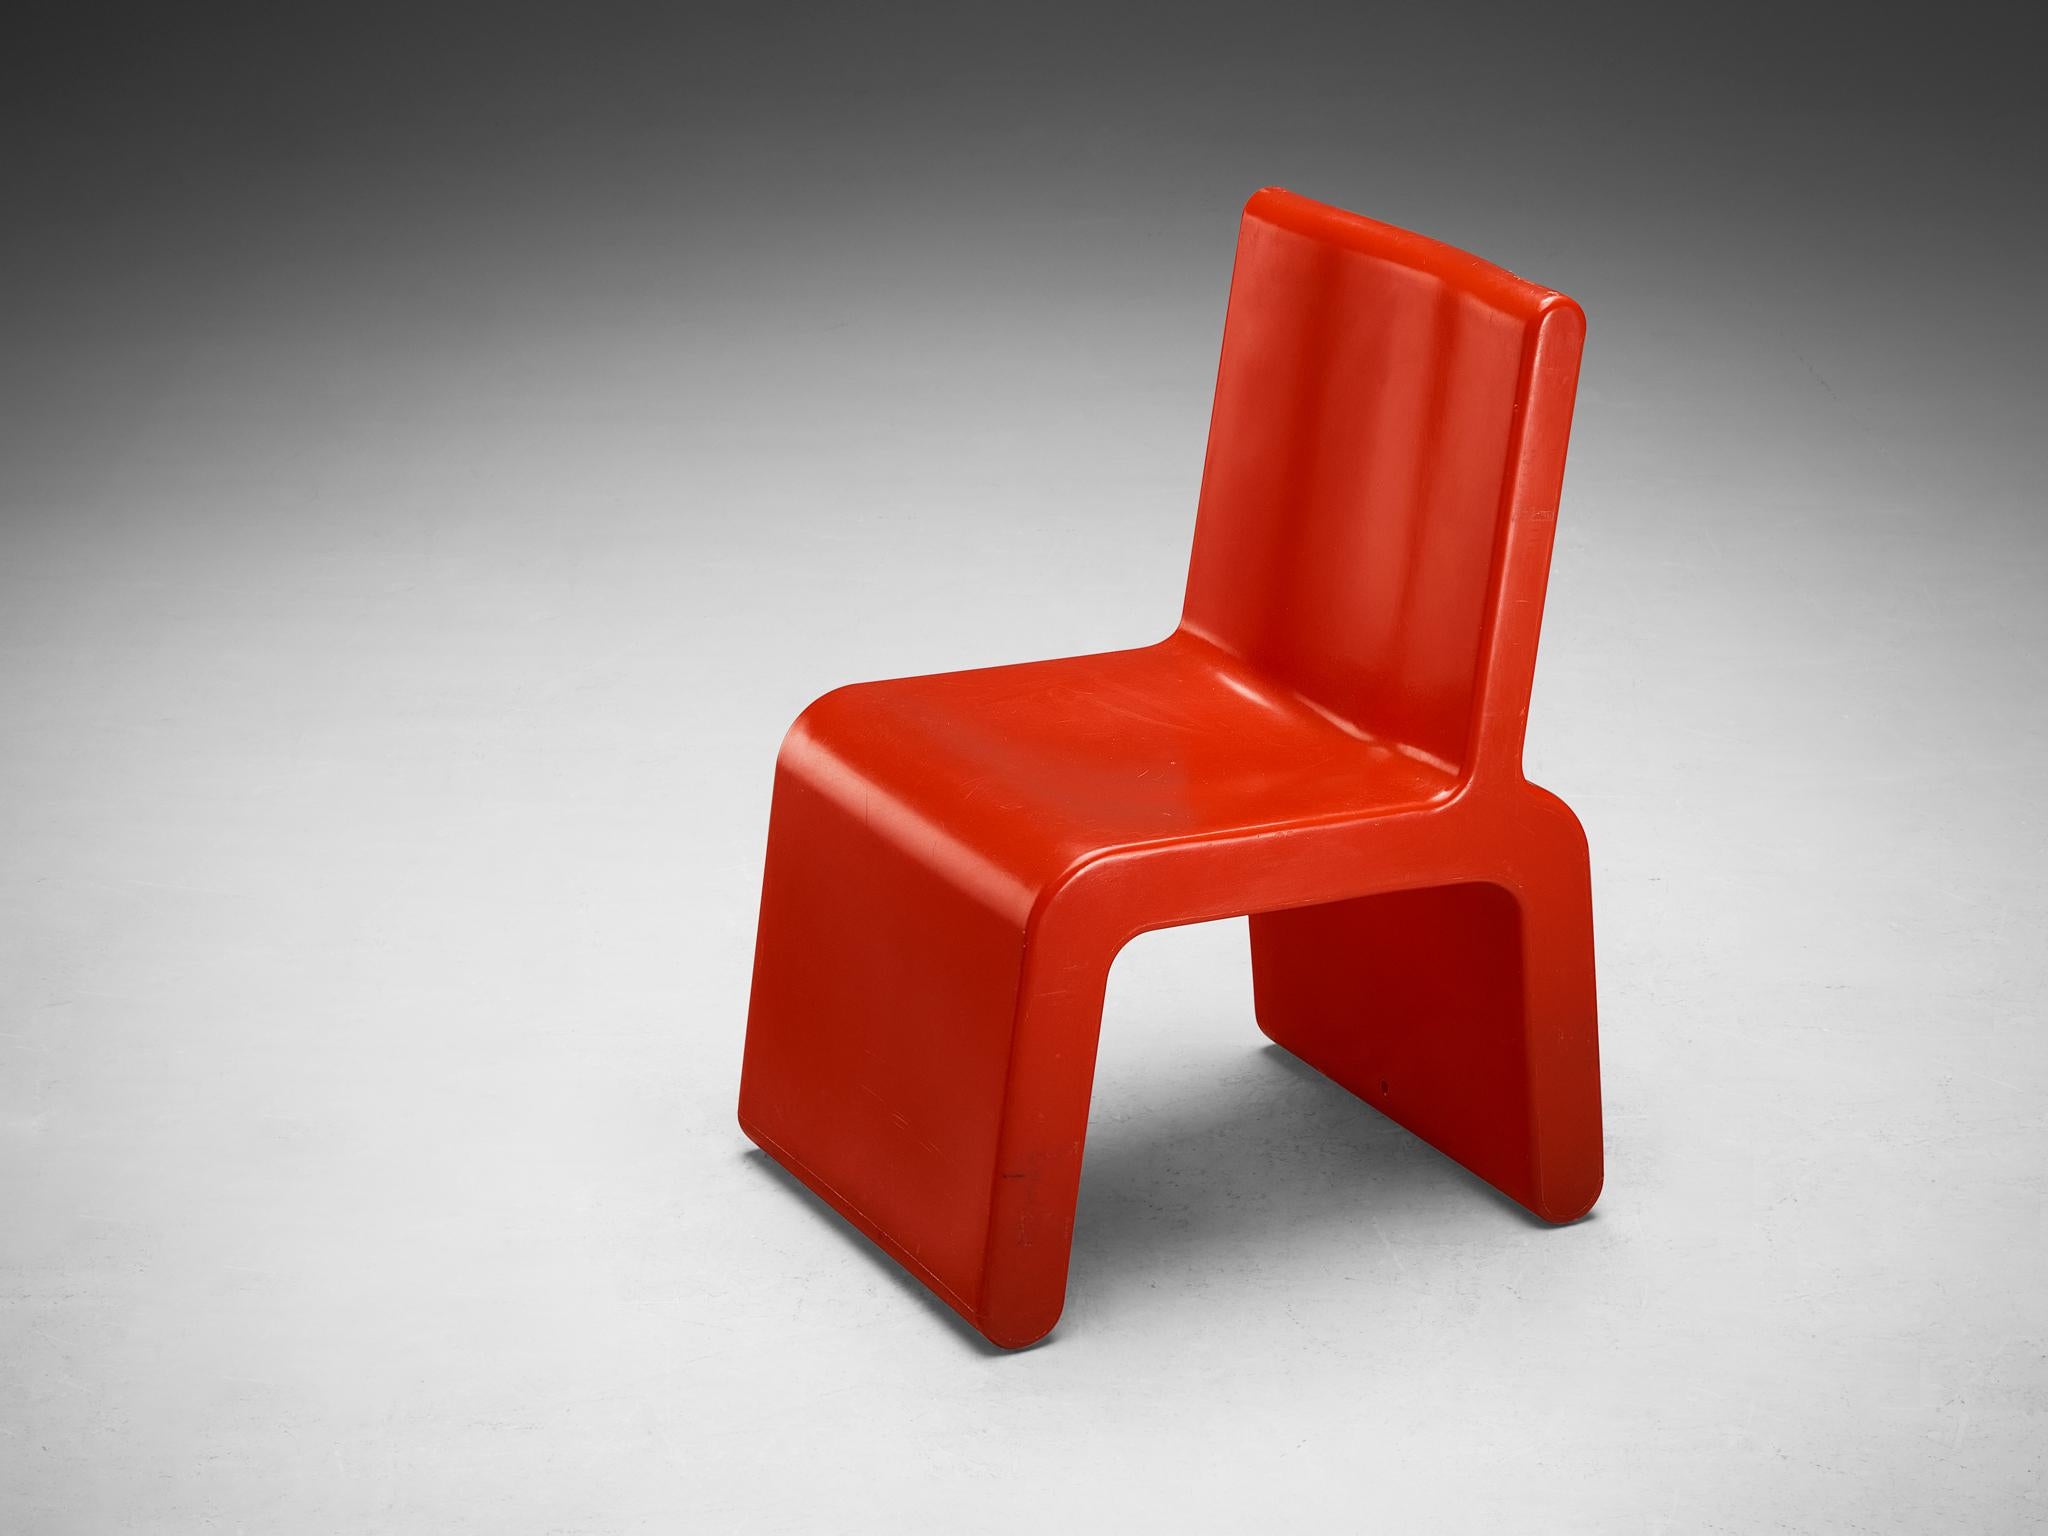 Marc Newson for W & LT (Wild & Lethal Trash) retail stores, chair, part of the 'Kiss the Future' series, rotation molded polypropylene, Australia / Belgium, 1996-1997 

Marc Newson (1963-), is an Australian-American designer recognized as one of the